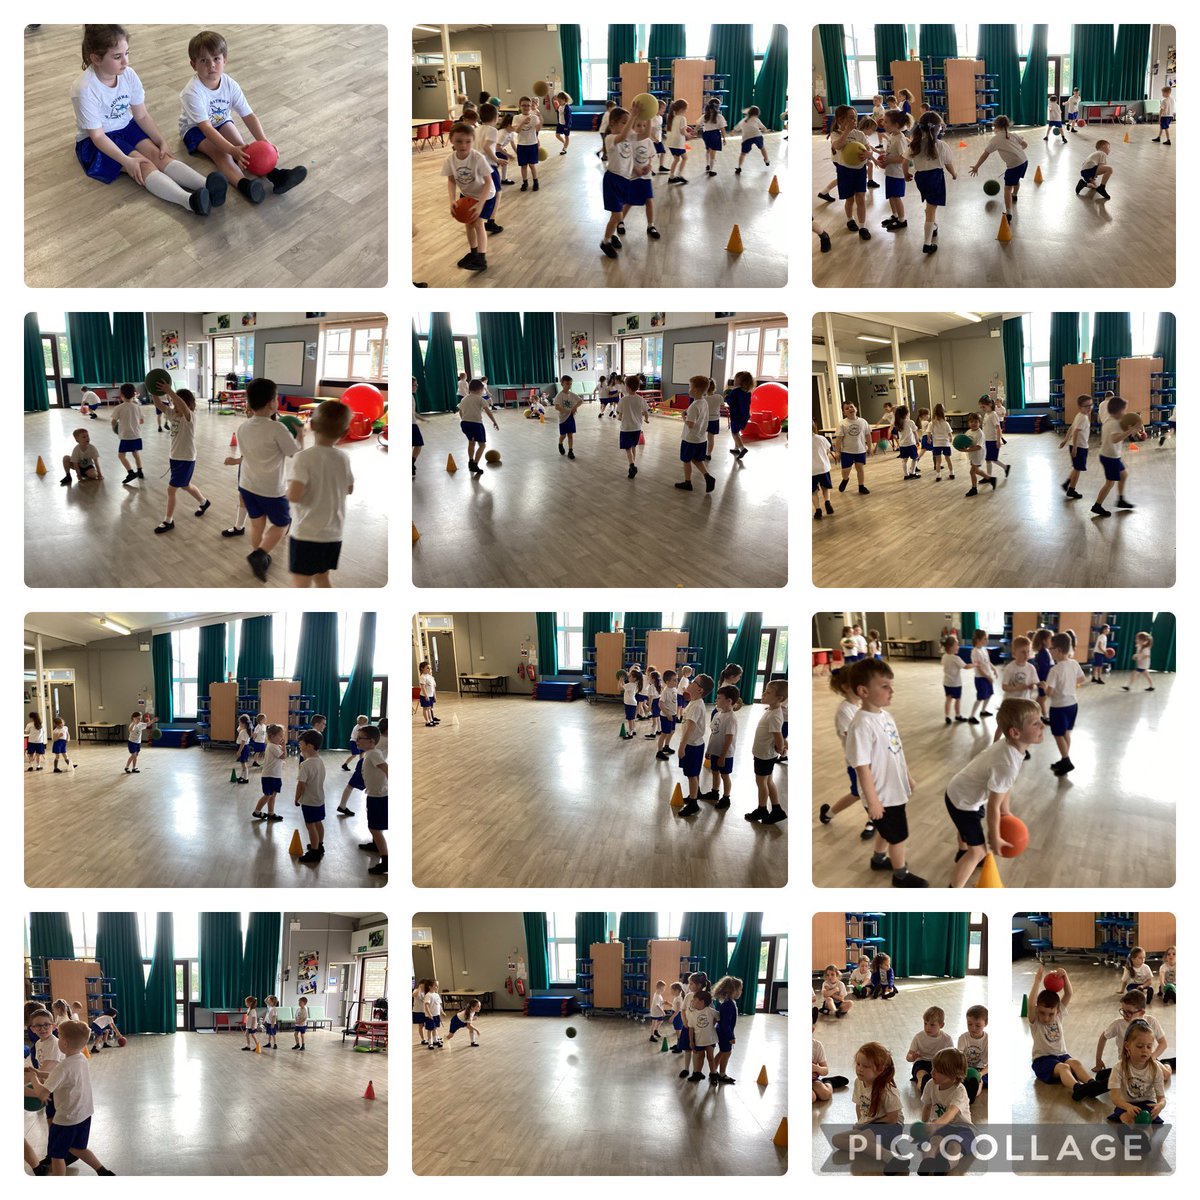 In PE, Year One have been practising sending and receiving balls with control.  #y1 #realpe